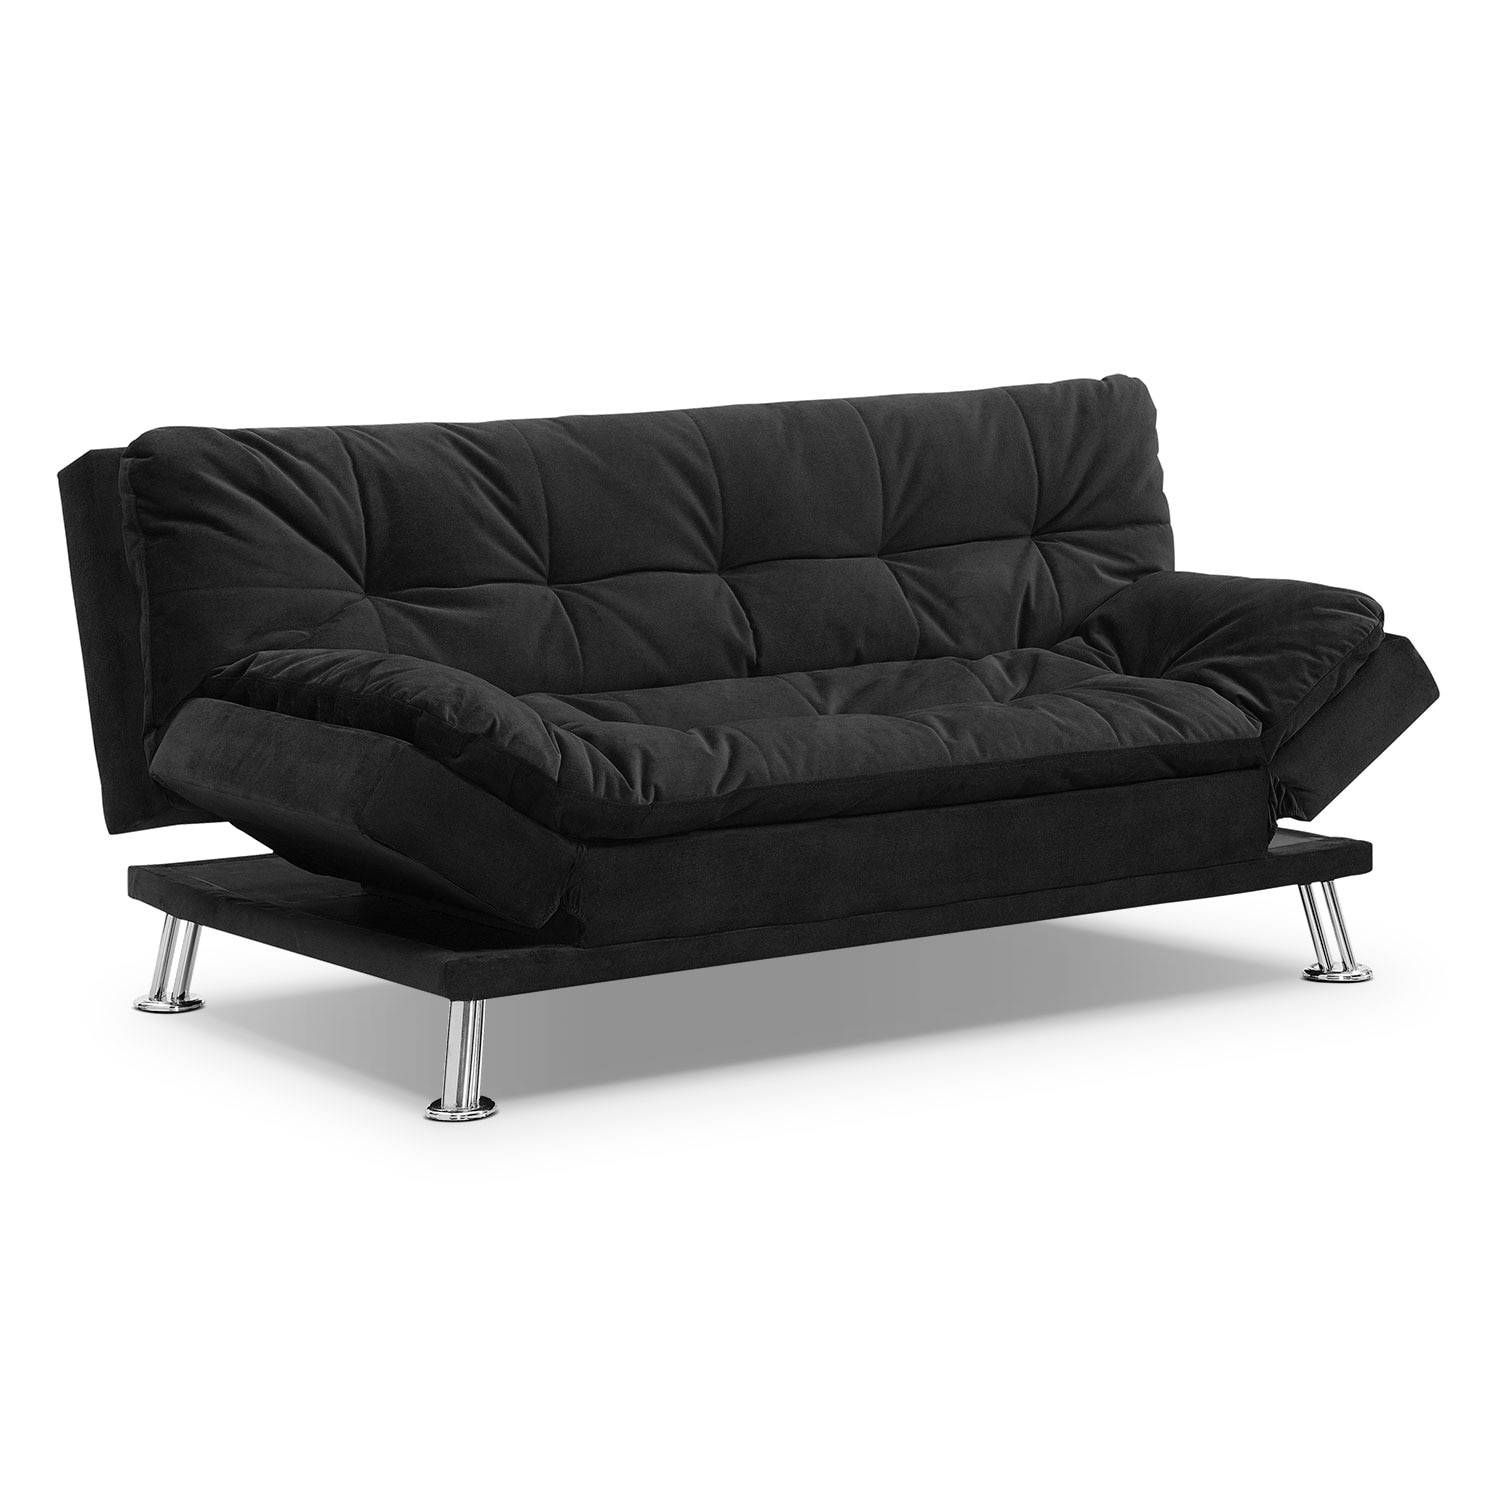 Waltz Futon Sofa Bed – Black | Value City Furniture Intended For Small Black Futon Sofa Beds (View 2 of 15)